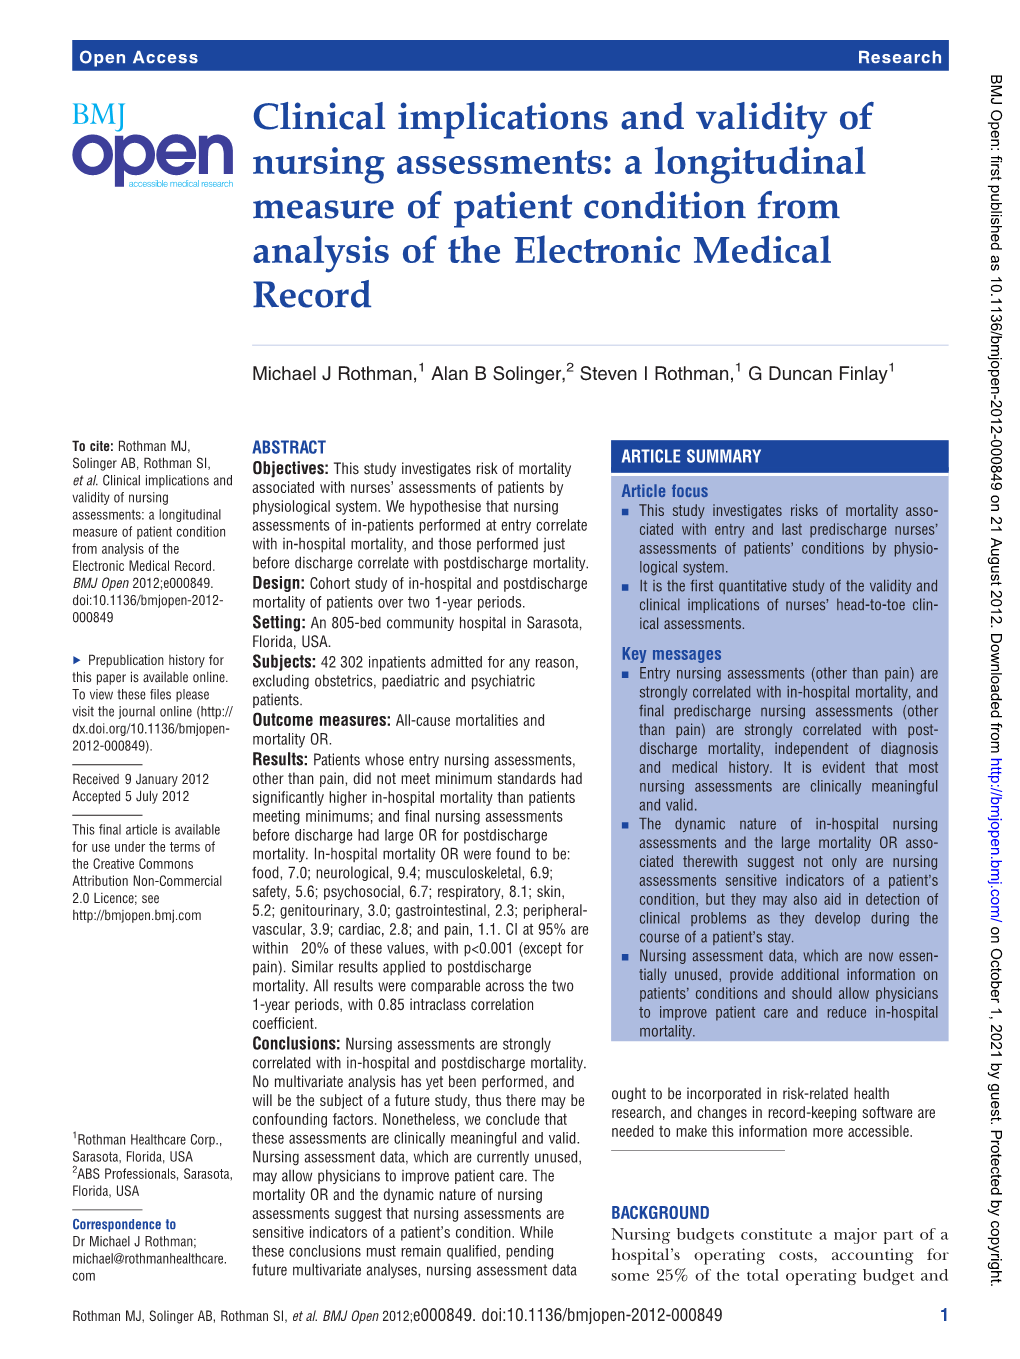 Clinical Implications and Validity of Nursing Assessments: a Longitudinal Measure of Patient Condition from Analysis of the Electronic Medical Record